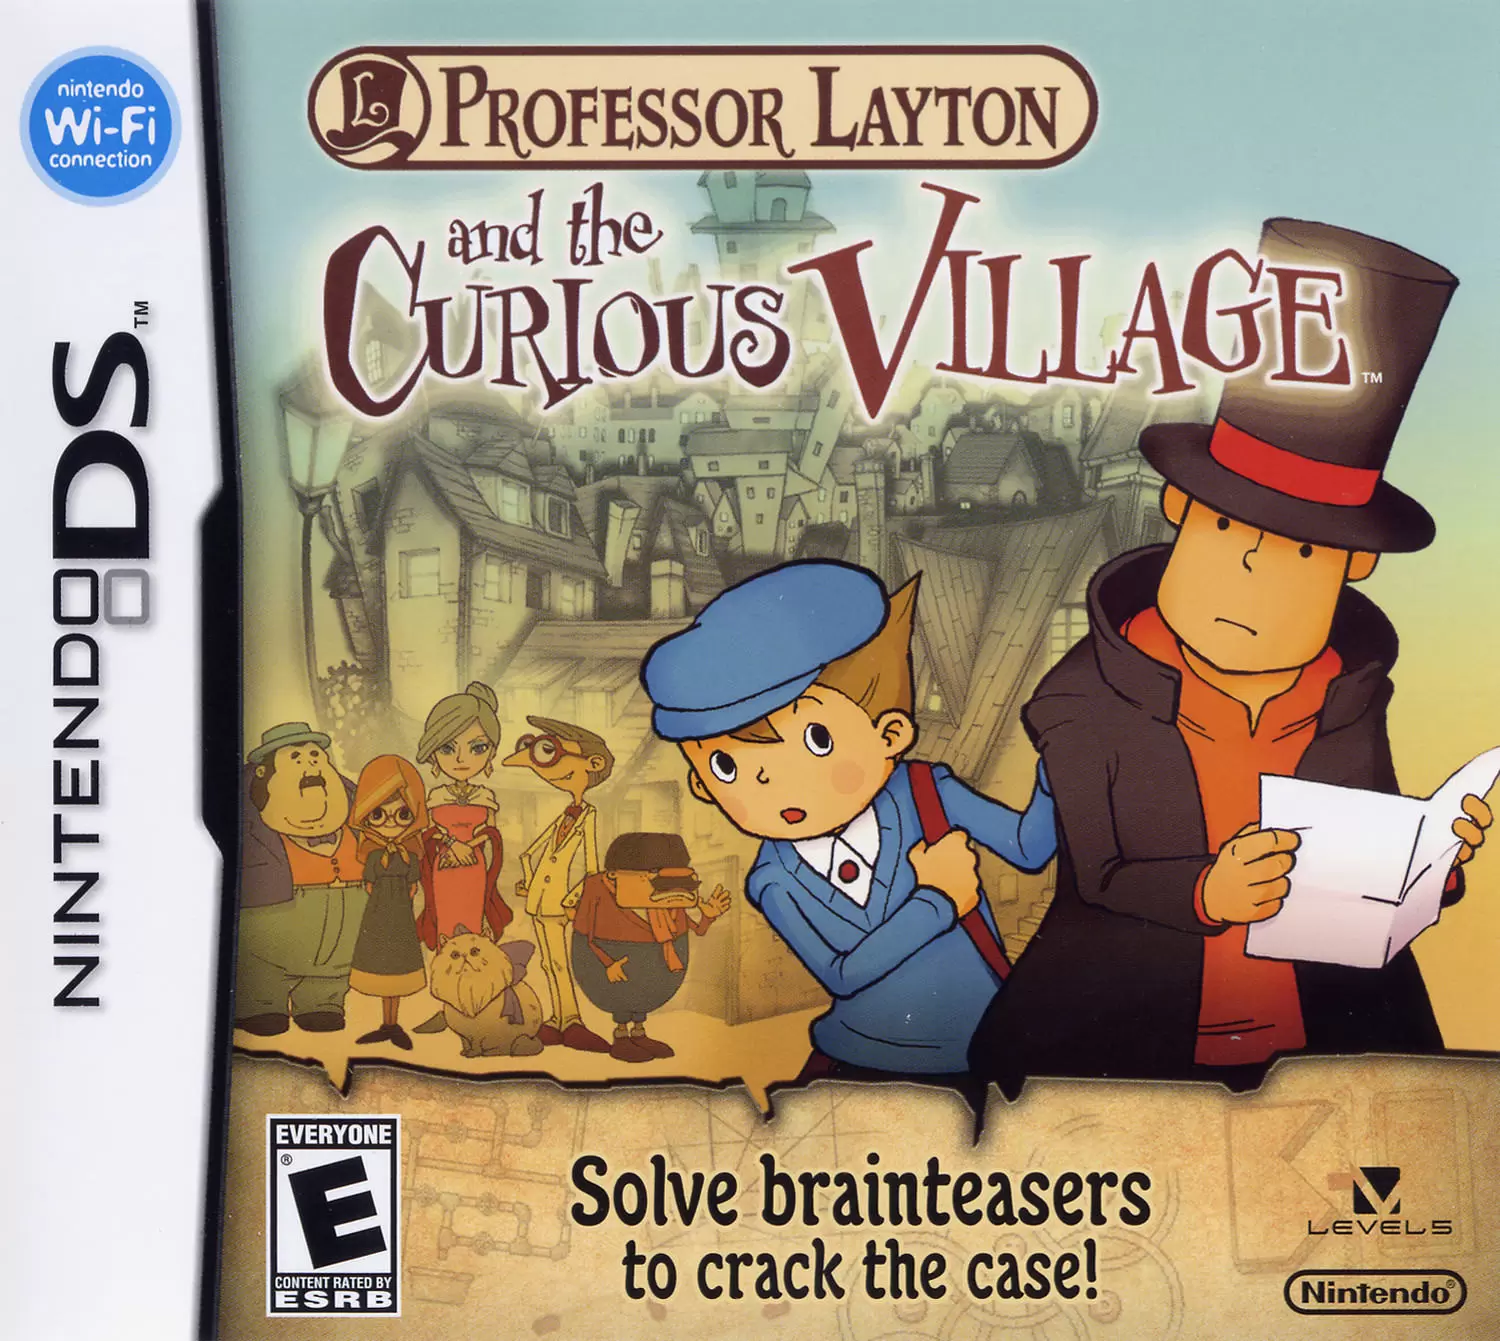 Nintendo DS Games - Professor Layton and the Curious Village